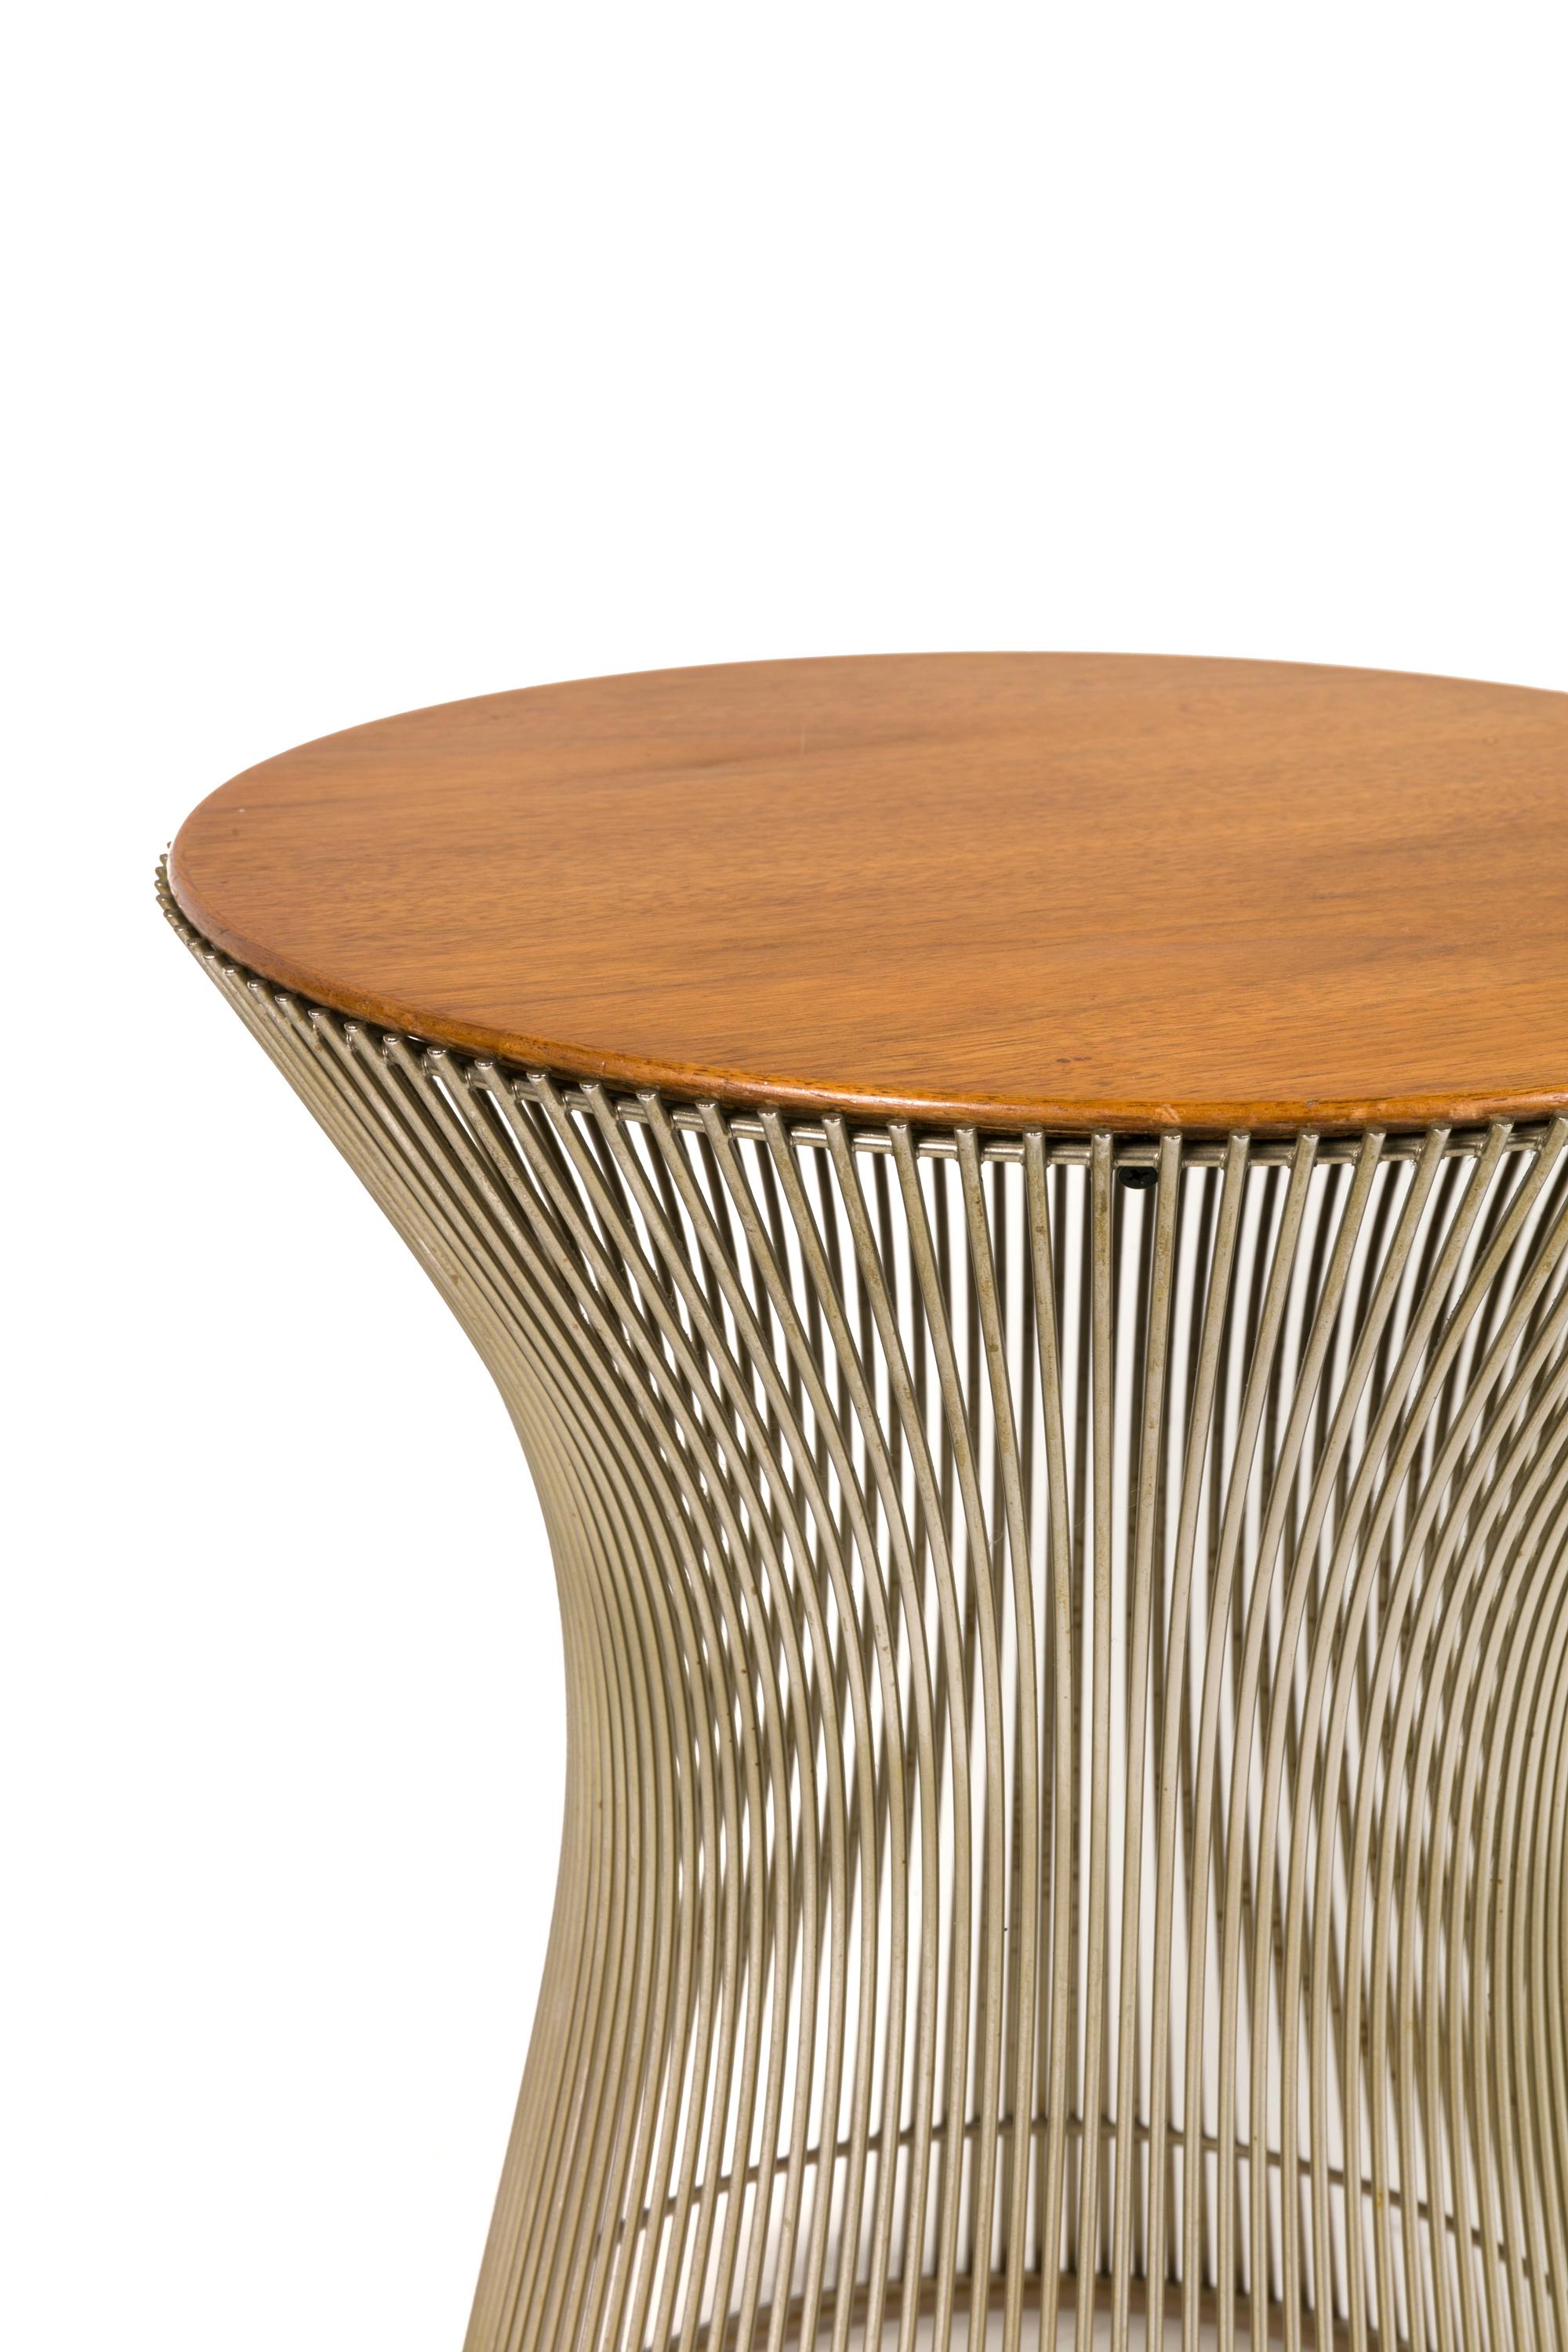 Mid-Century Modern Warren Platner Walnut and Chrome Side Table for Knoll, USA, 1970s